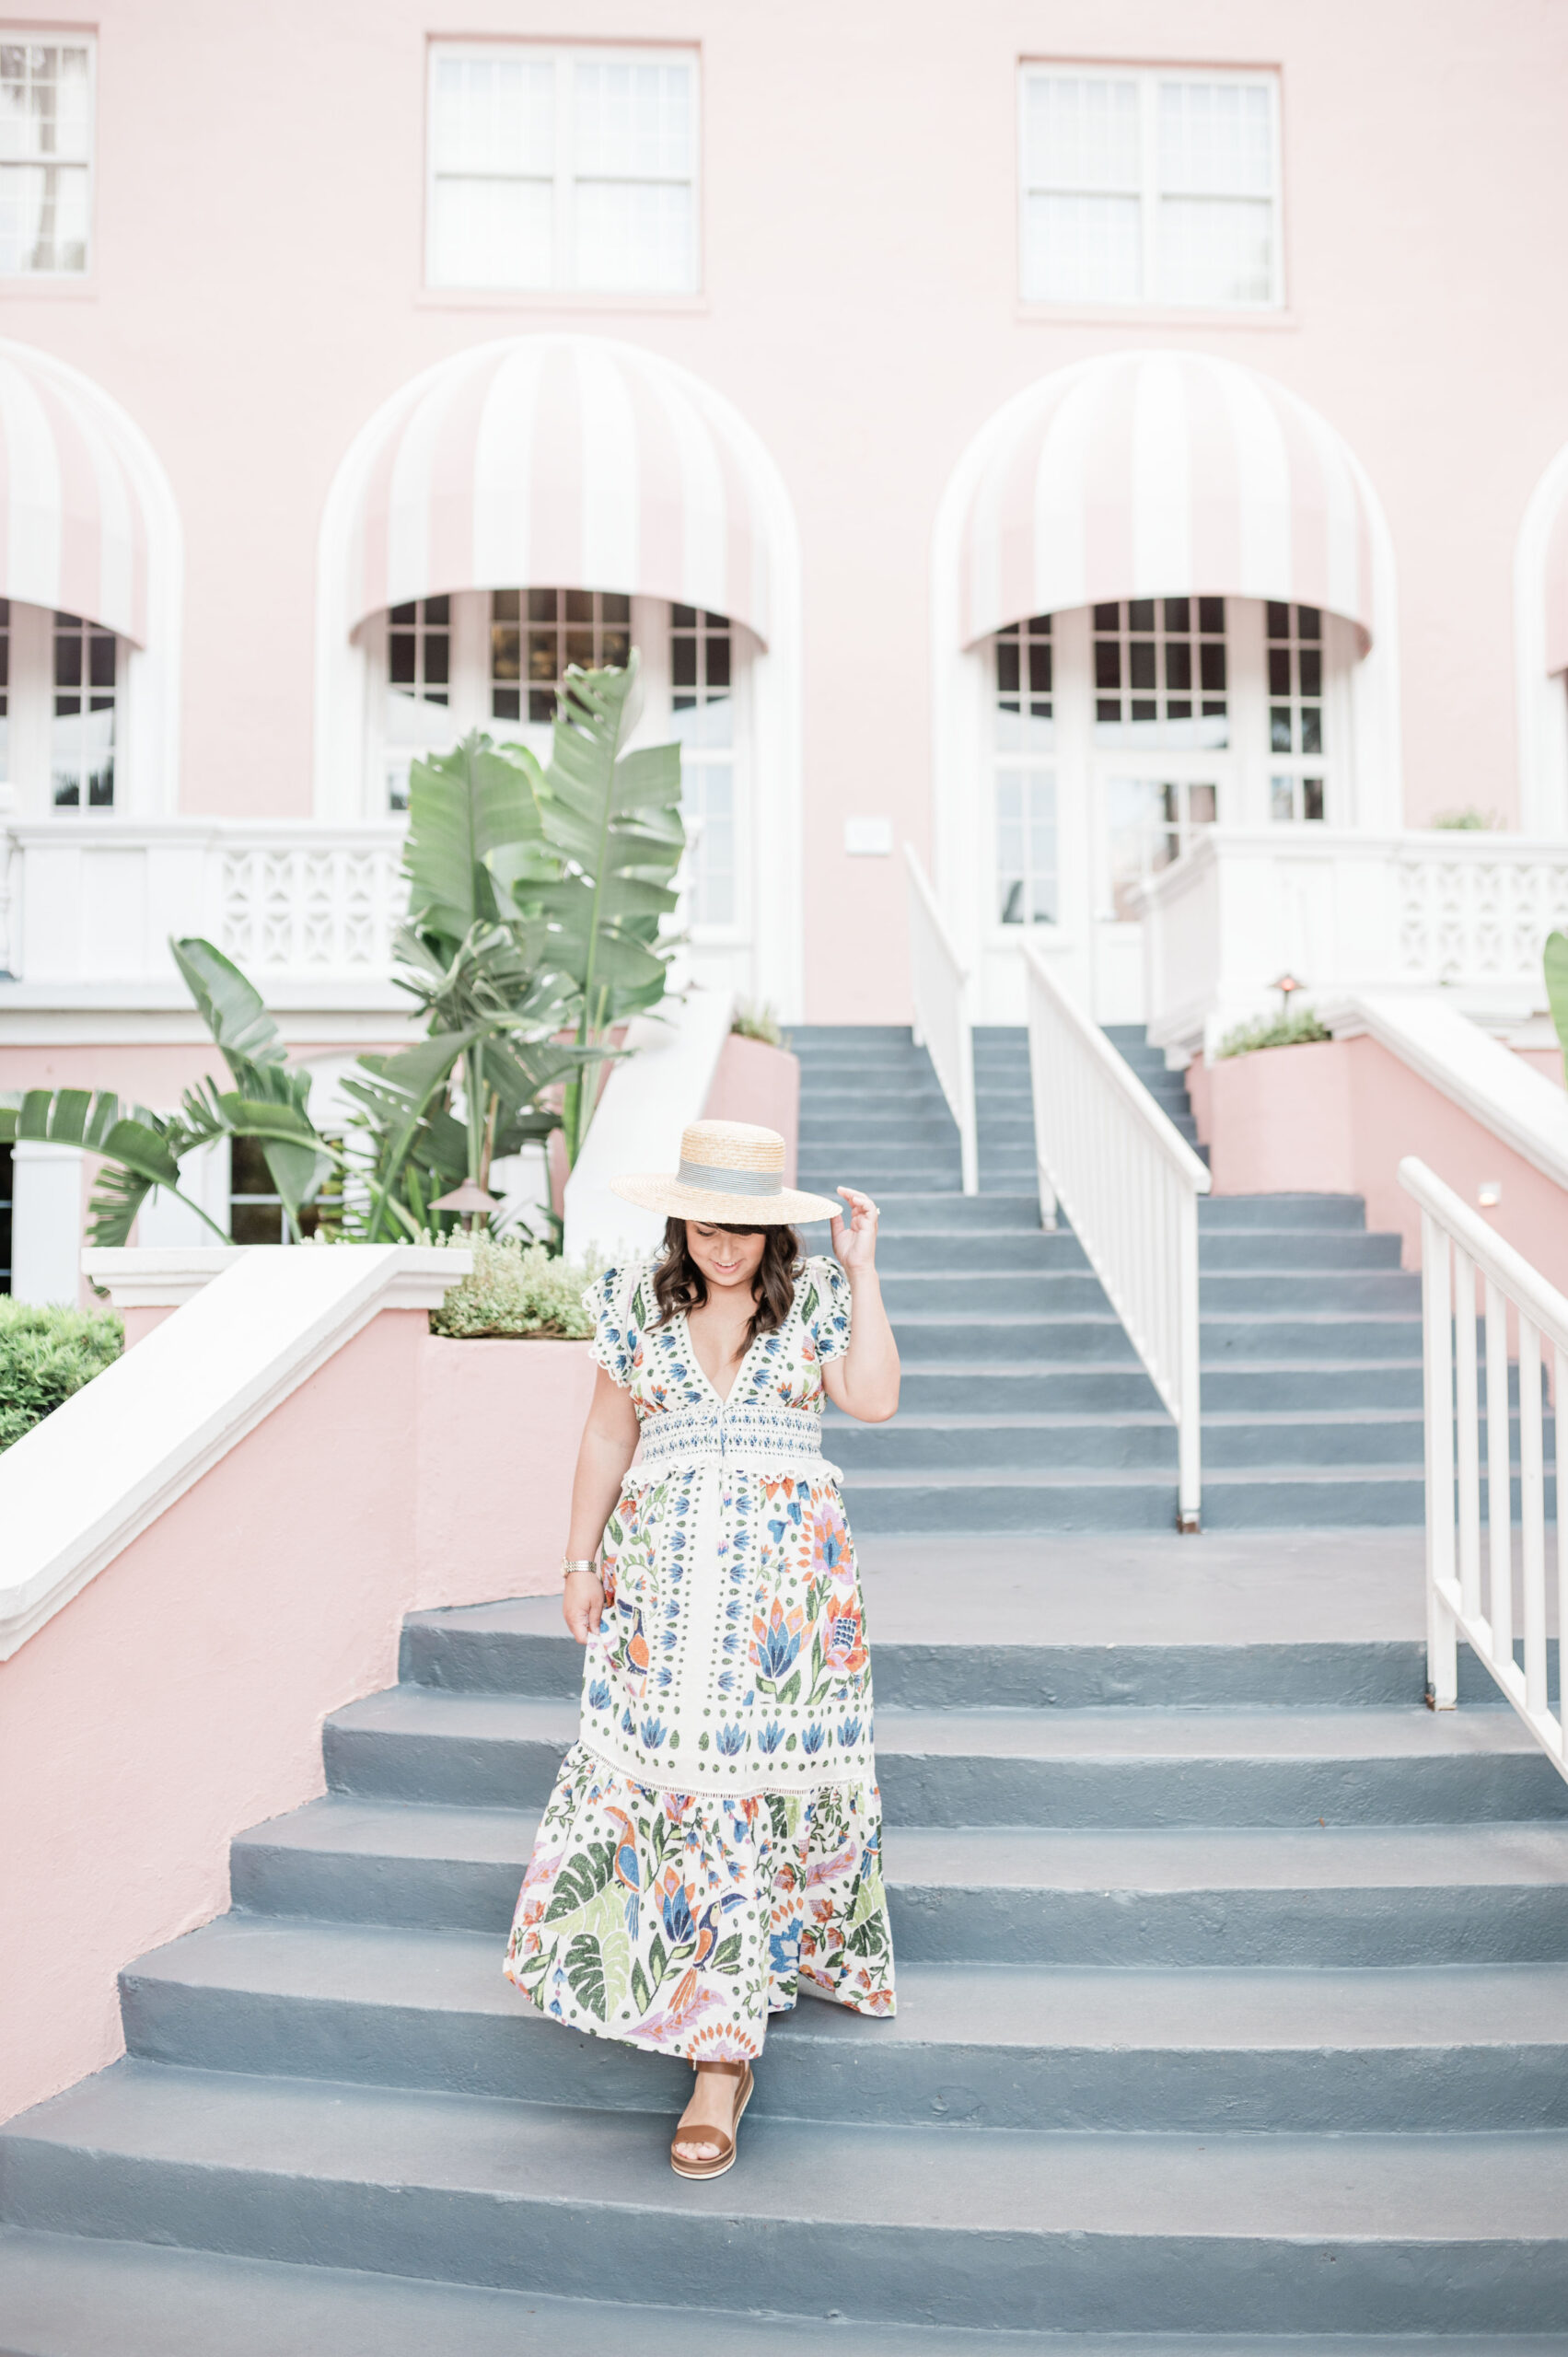 Brittney Naylor wearing Farm Rio maxi dress and hat walking down the stairs at The Don CeSar most instagrammable hotel in Florida